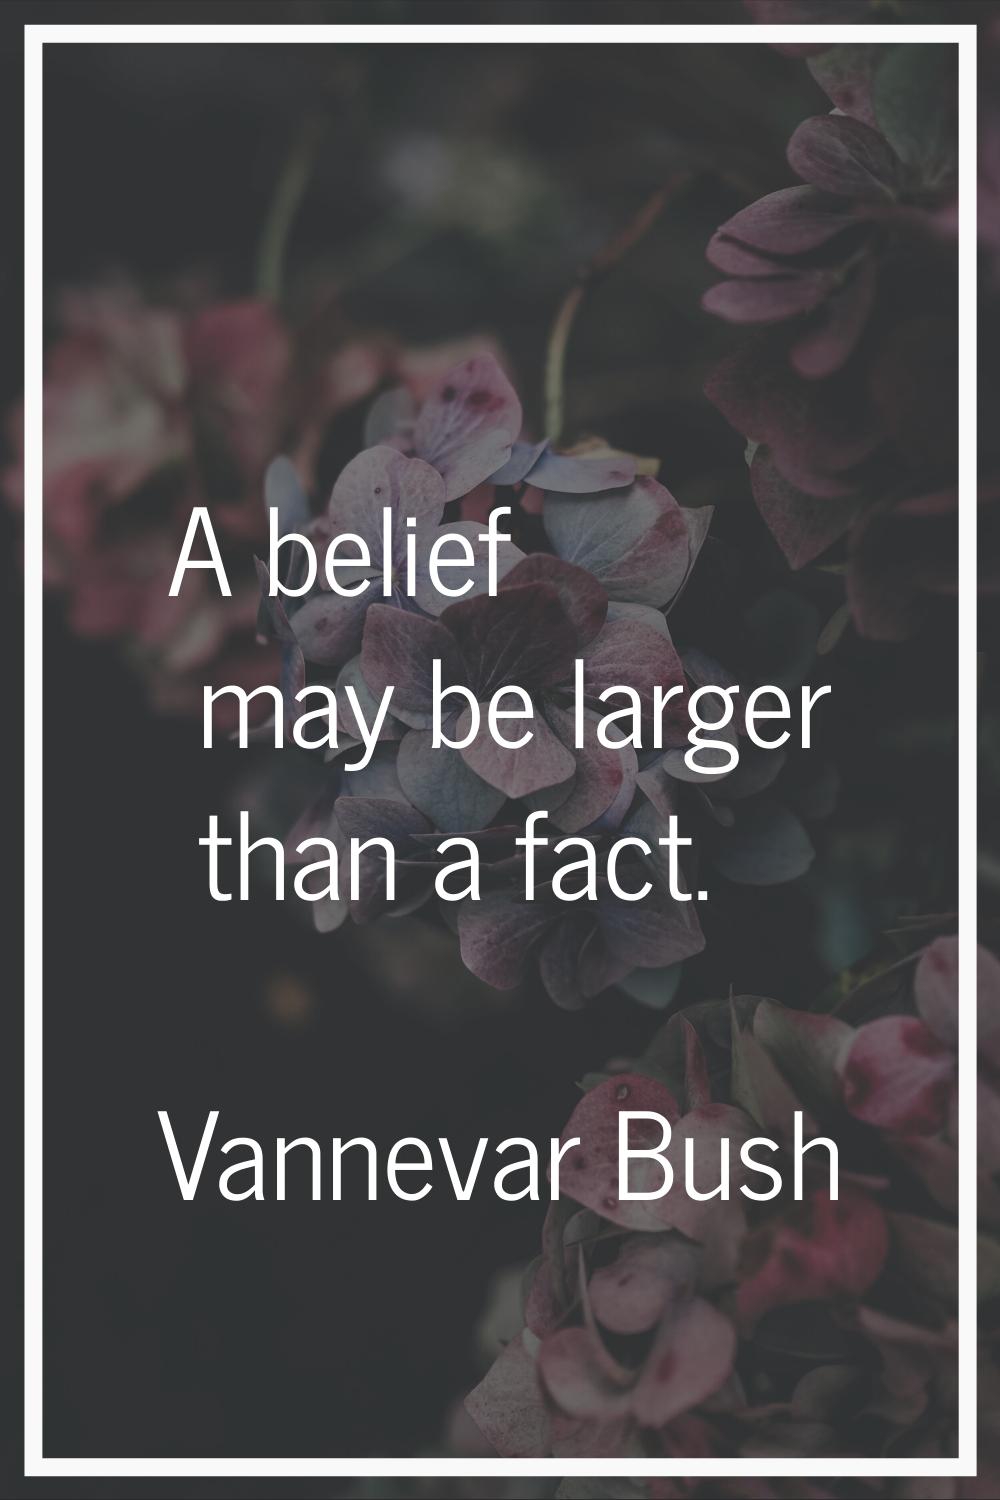 A belief may be larger than a fact.